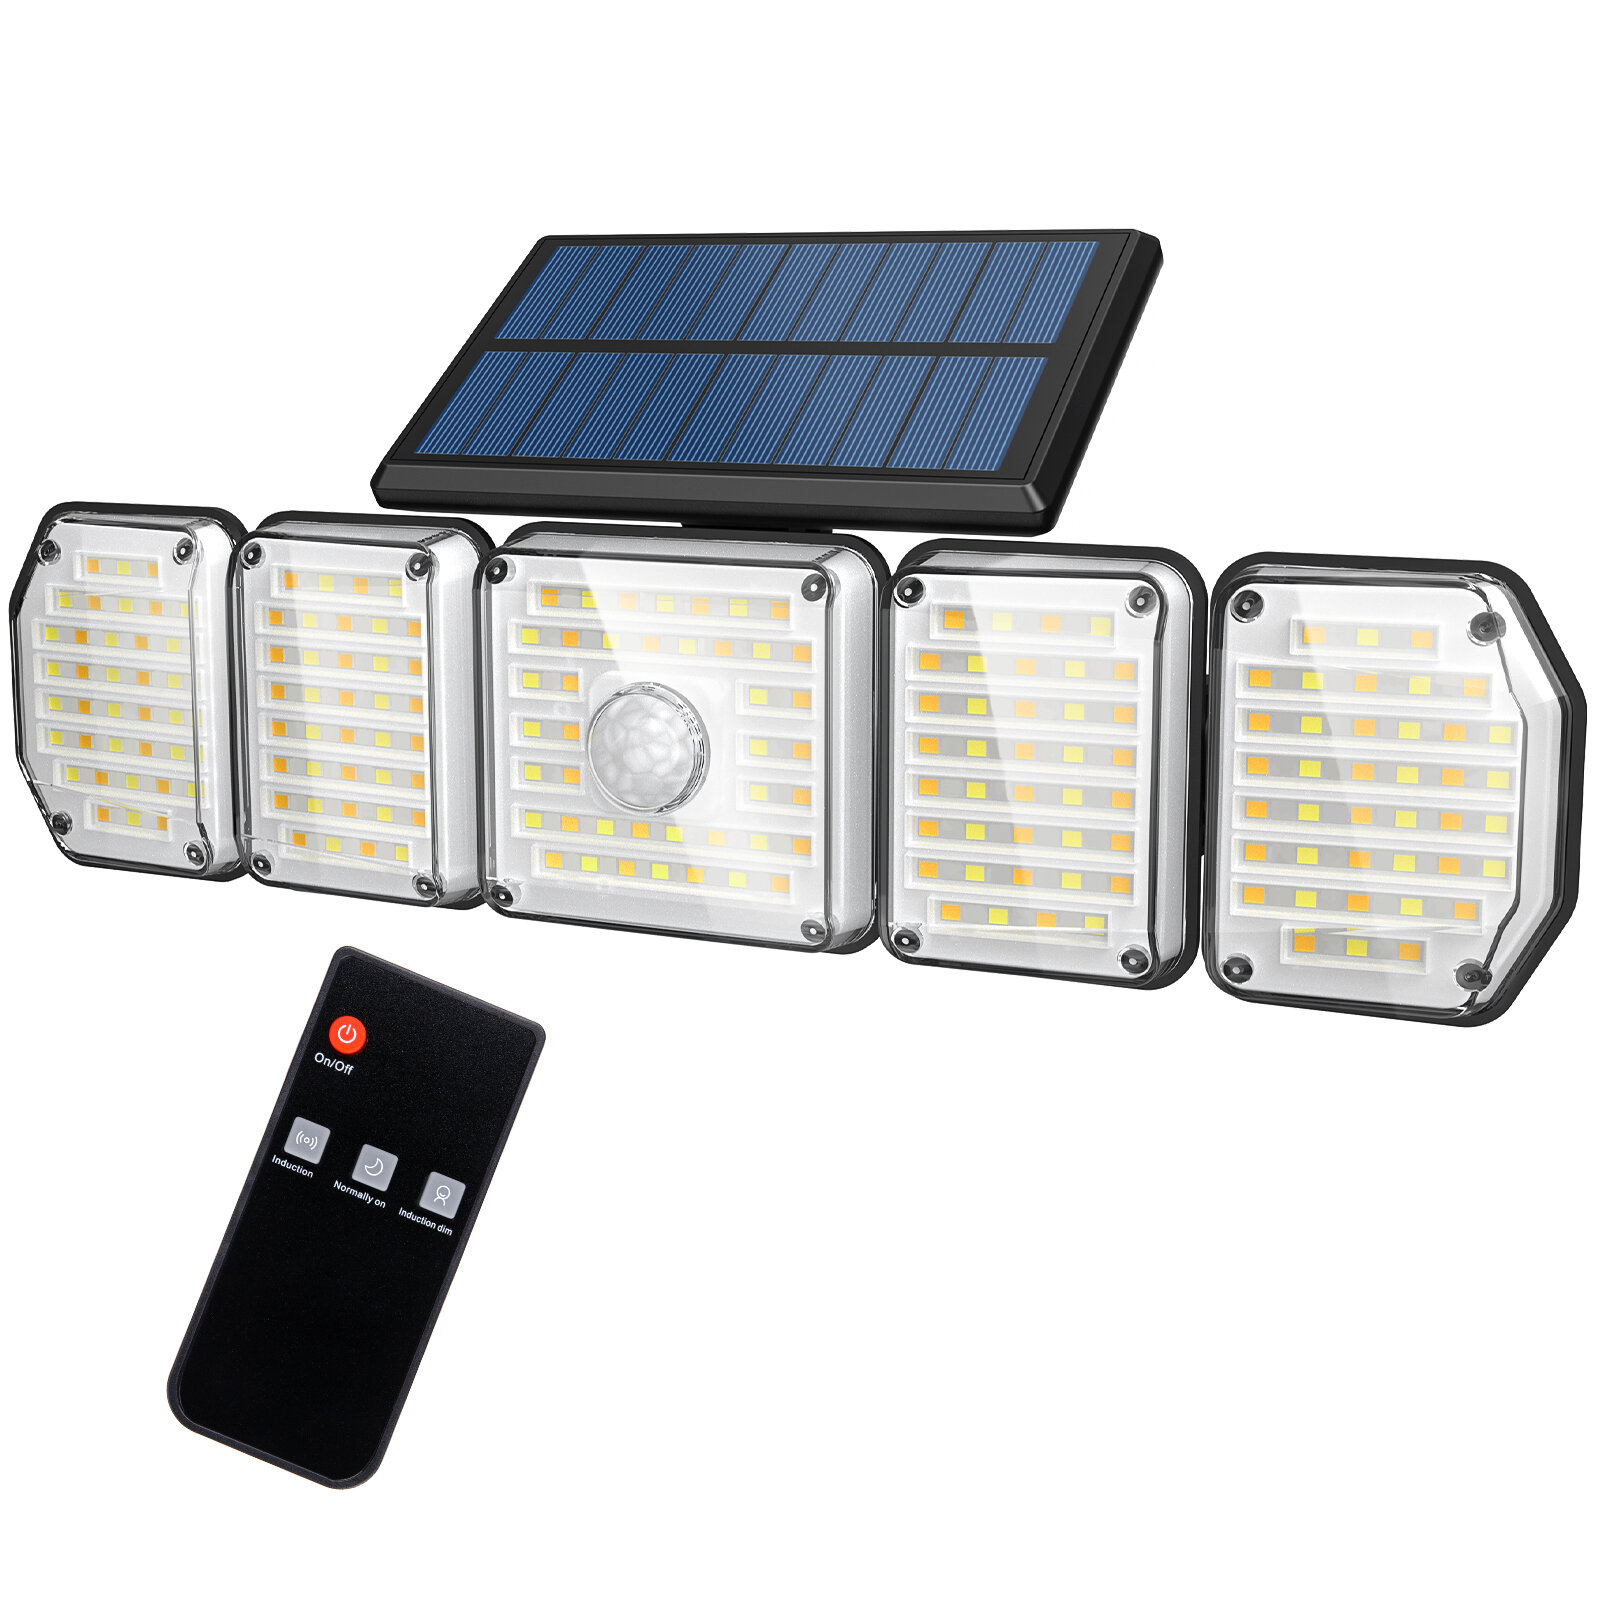 Somoreal SM-OLT2 Rotatable 5 Heads 214LED Solar Sensor Wall Light 3 Color Temperatures Remote Control 3 Working Modes IP